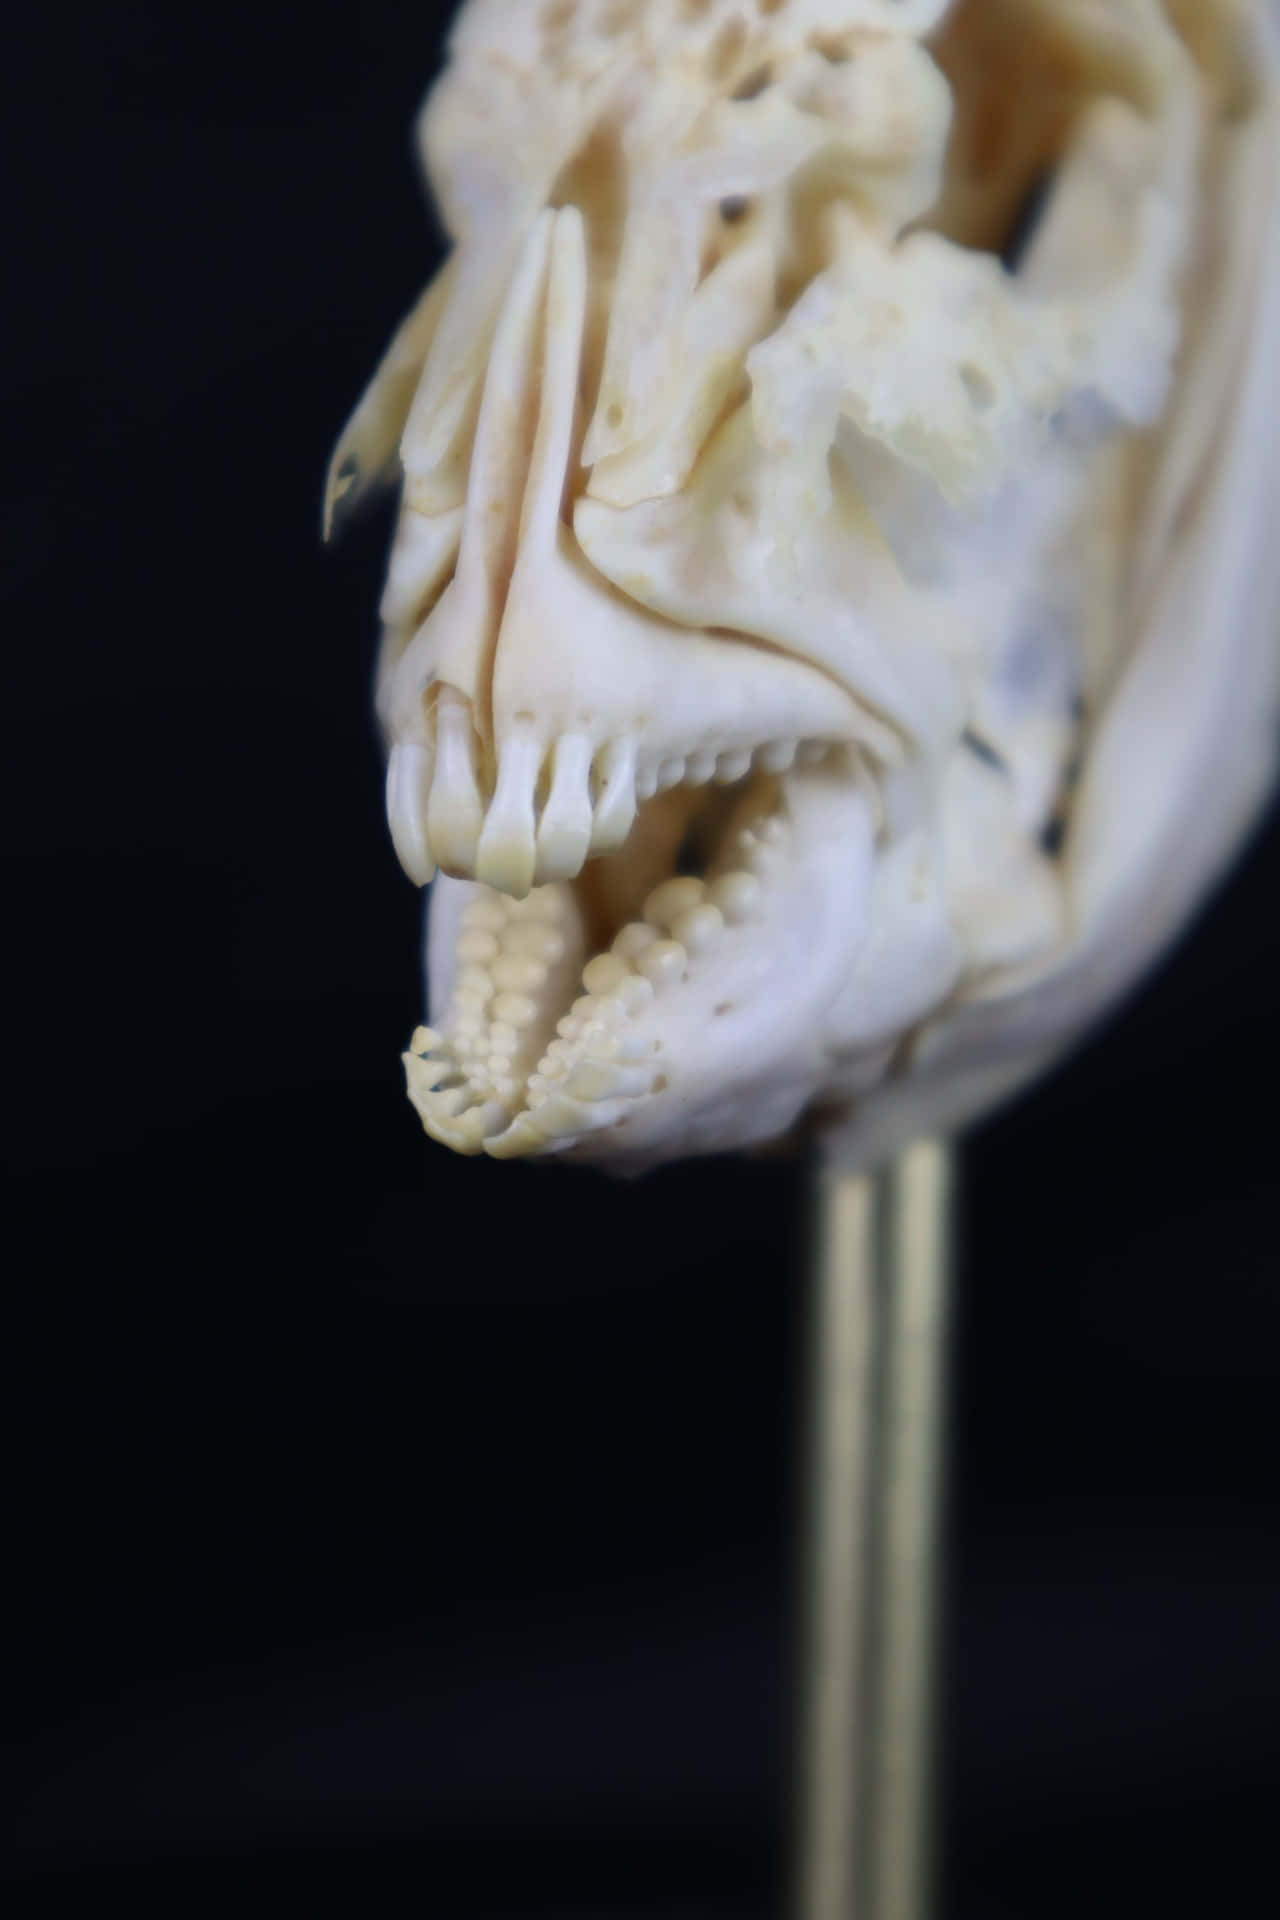 A Skull With Teeth On A Stand